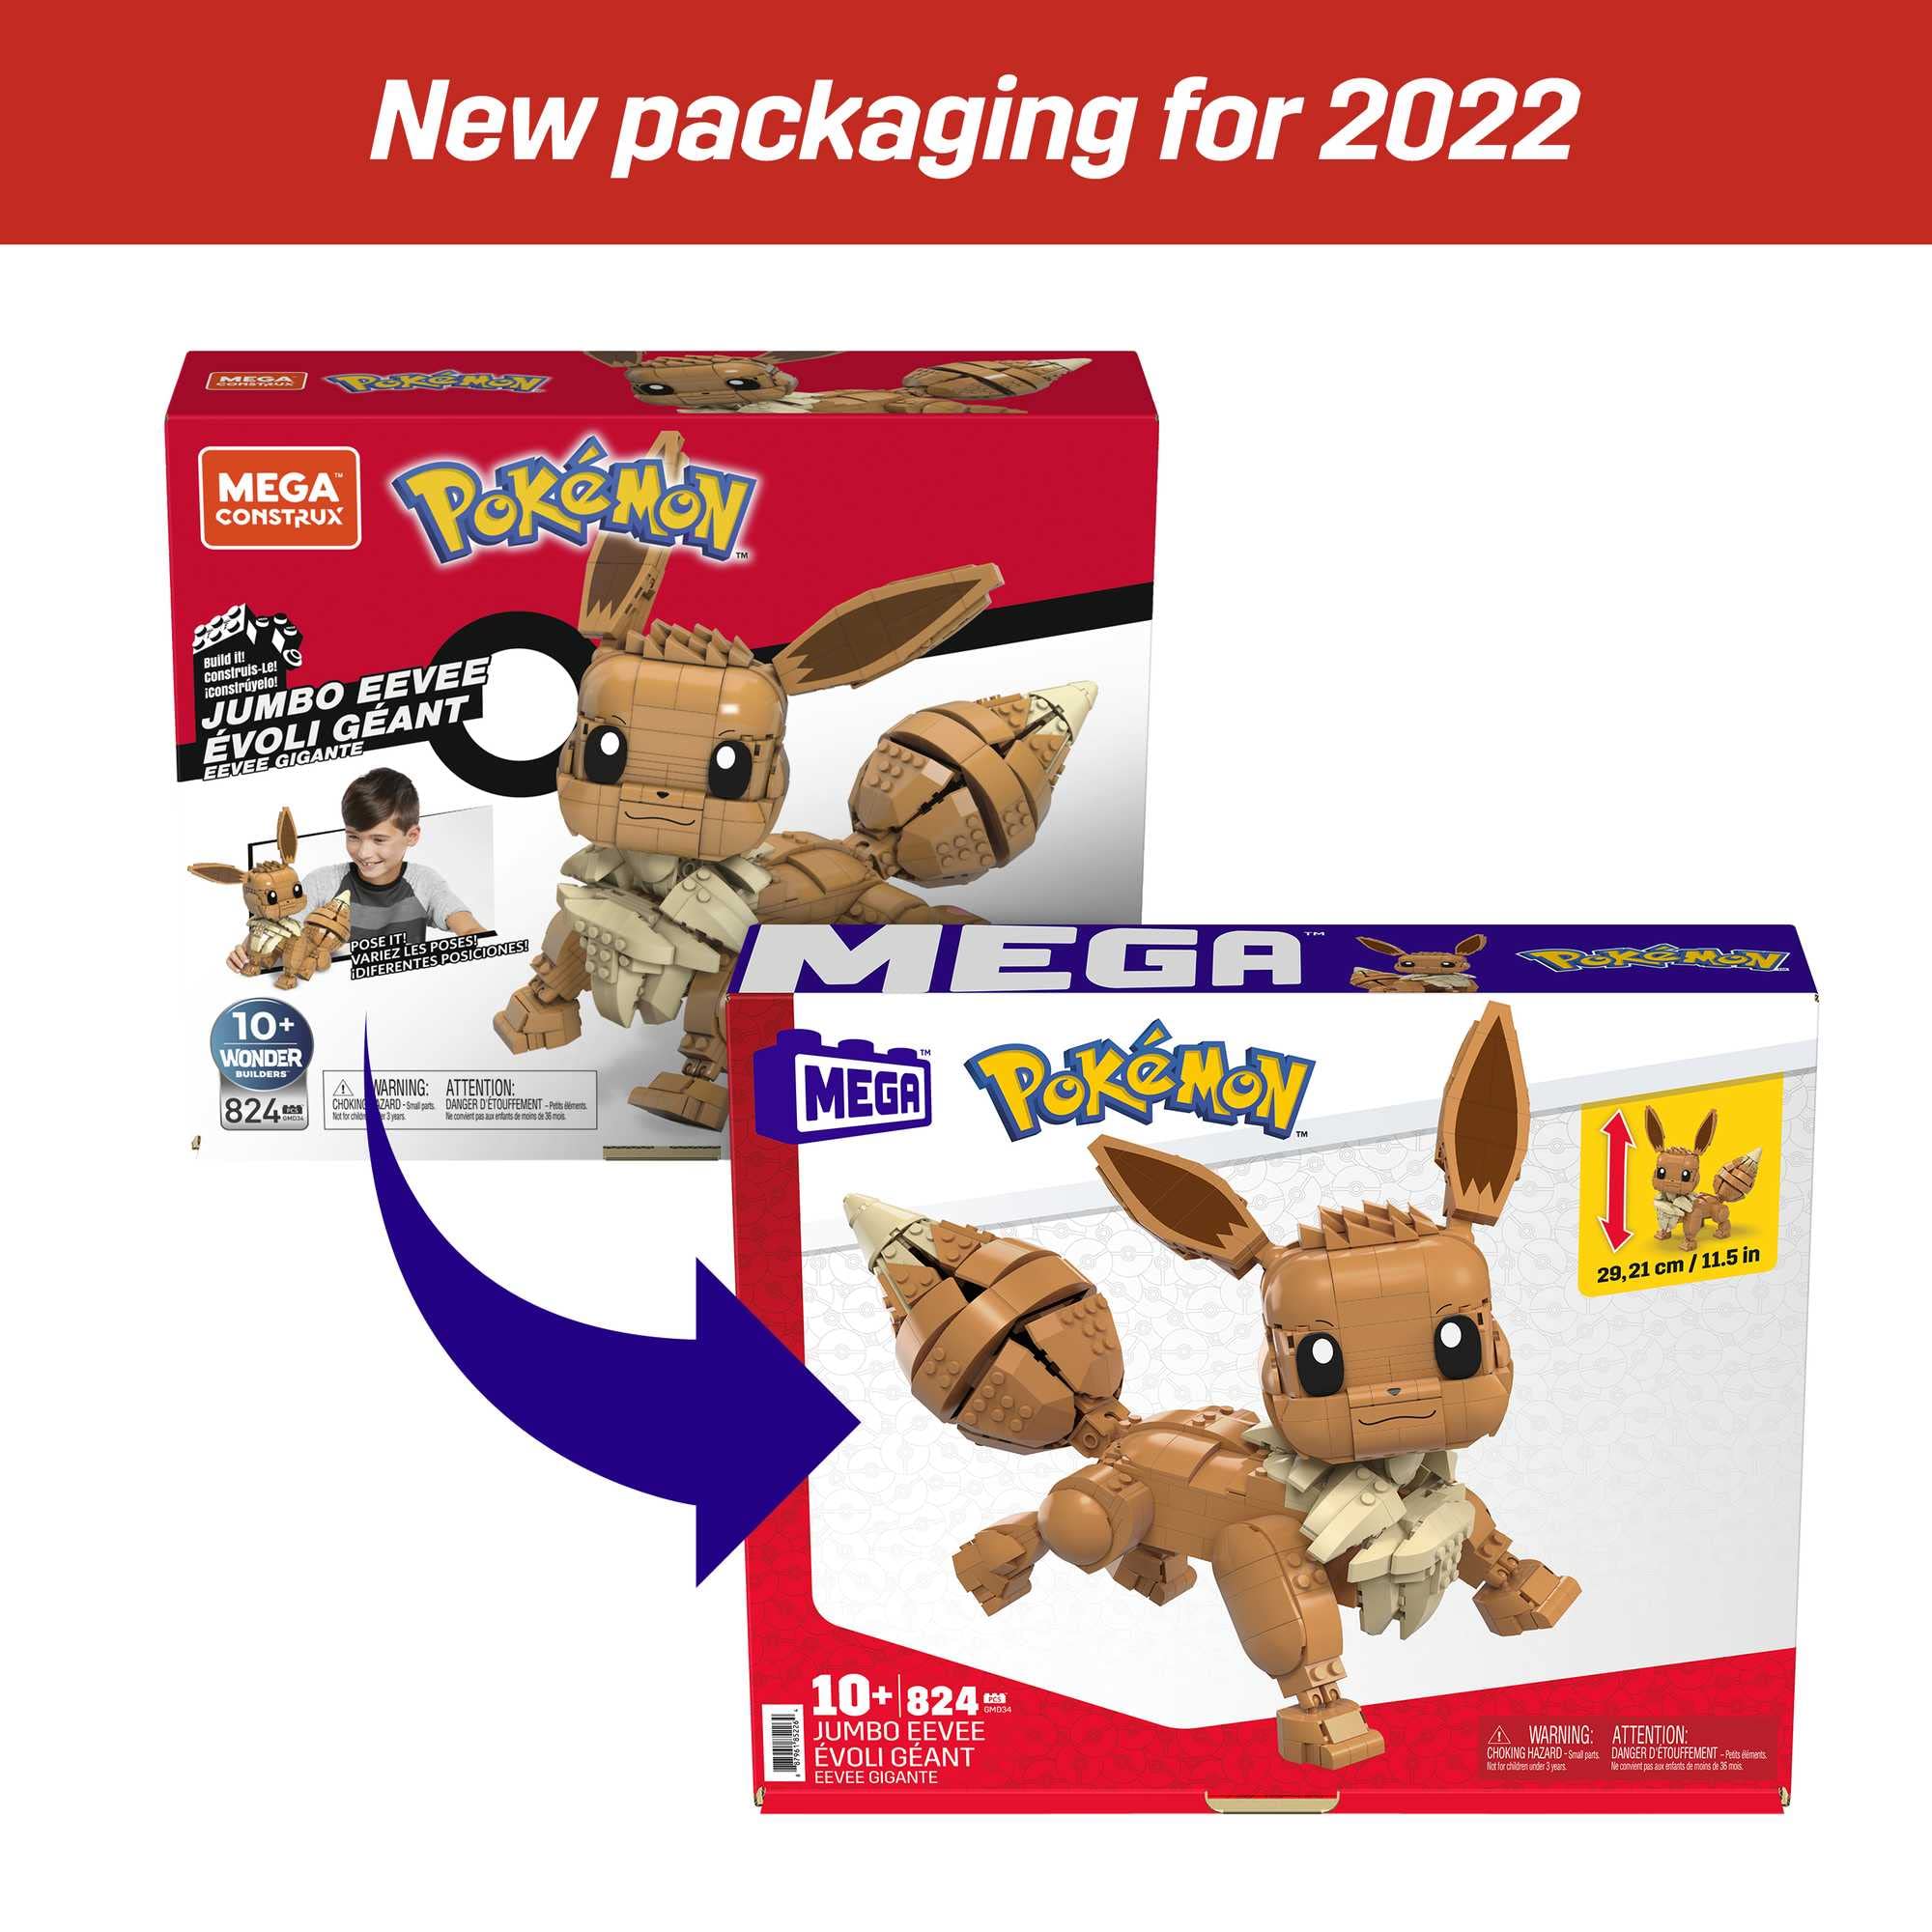 Mega Pokémon Jumbo Eevee Toy Building Set, 11 inches Tall, poseable, 824 Bricks and Pieces, for Boys and Girls, Ages 6 and up​